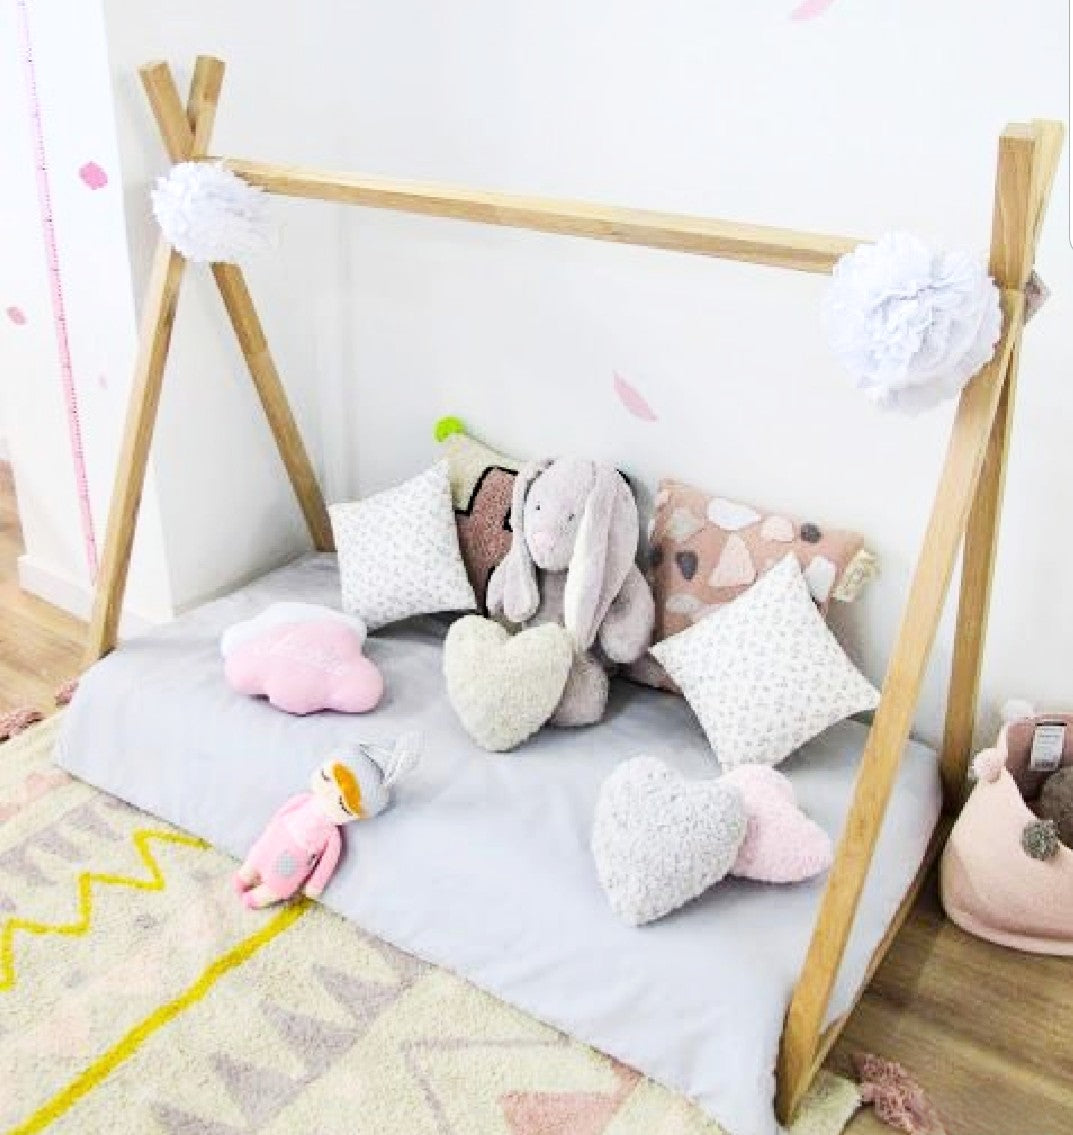 Toddler Teepee Bed (Cot Size) - Furniture